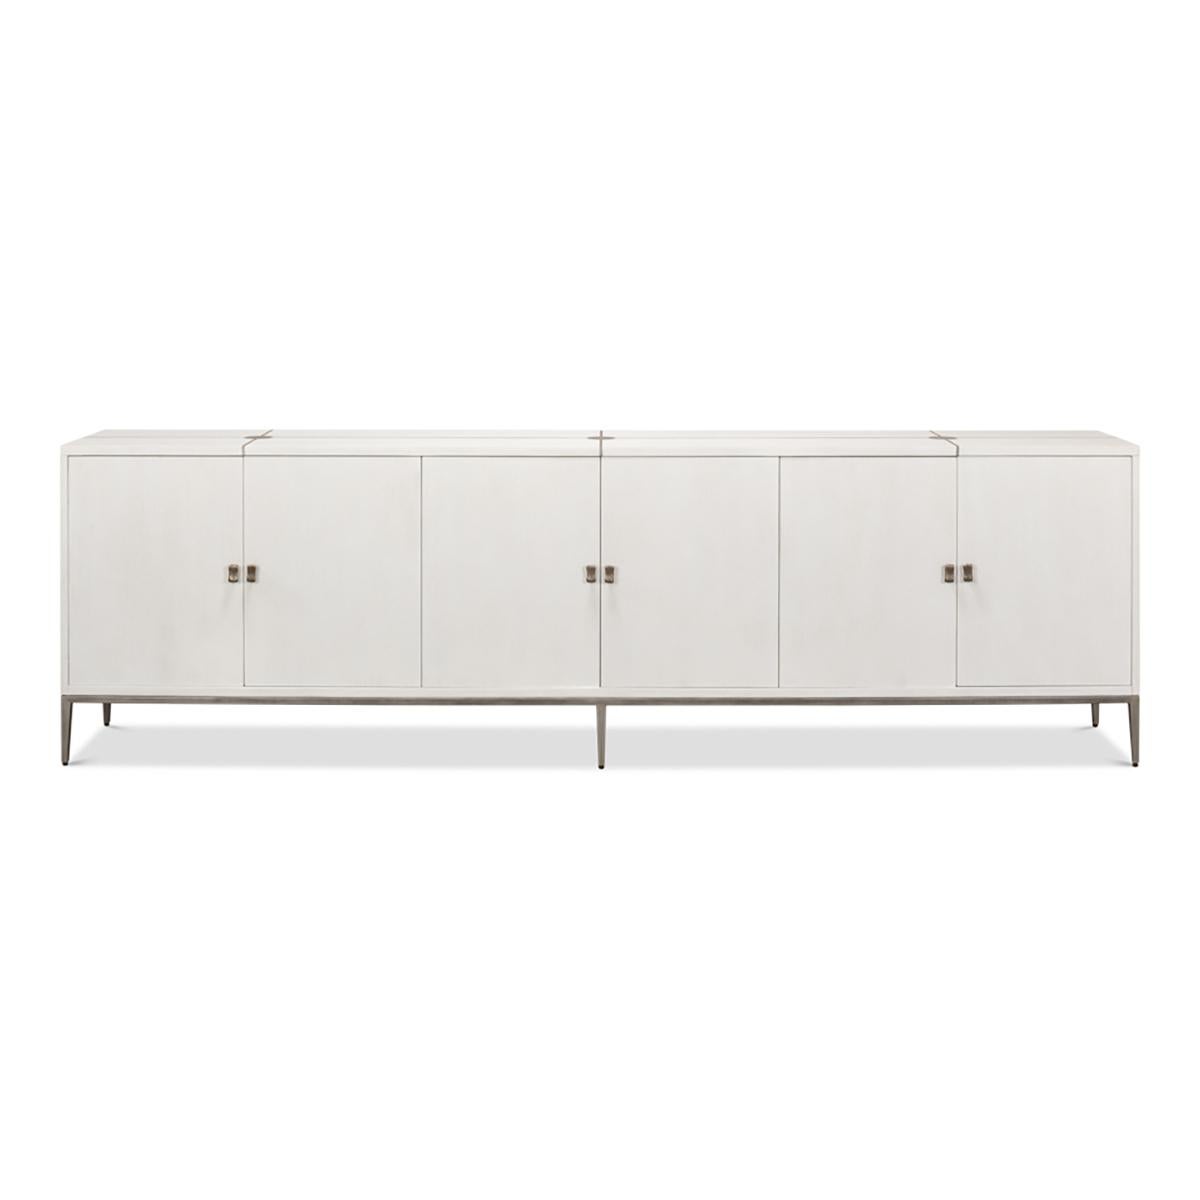 Precision-crafted, this exquisite piece boasts Oak veneers in a pristine white finish, complemented by textured gunmetal iron inlays in both circular and linear designs.

This credenza's proportions are meticulously designed for modern aesthetics,